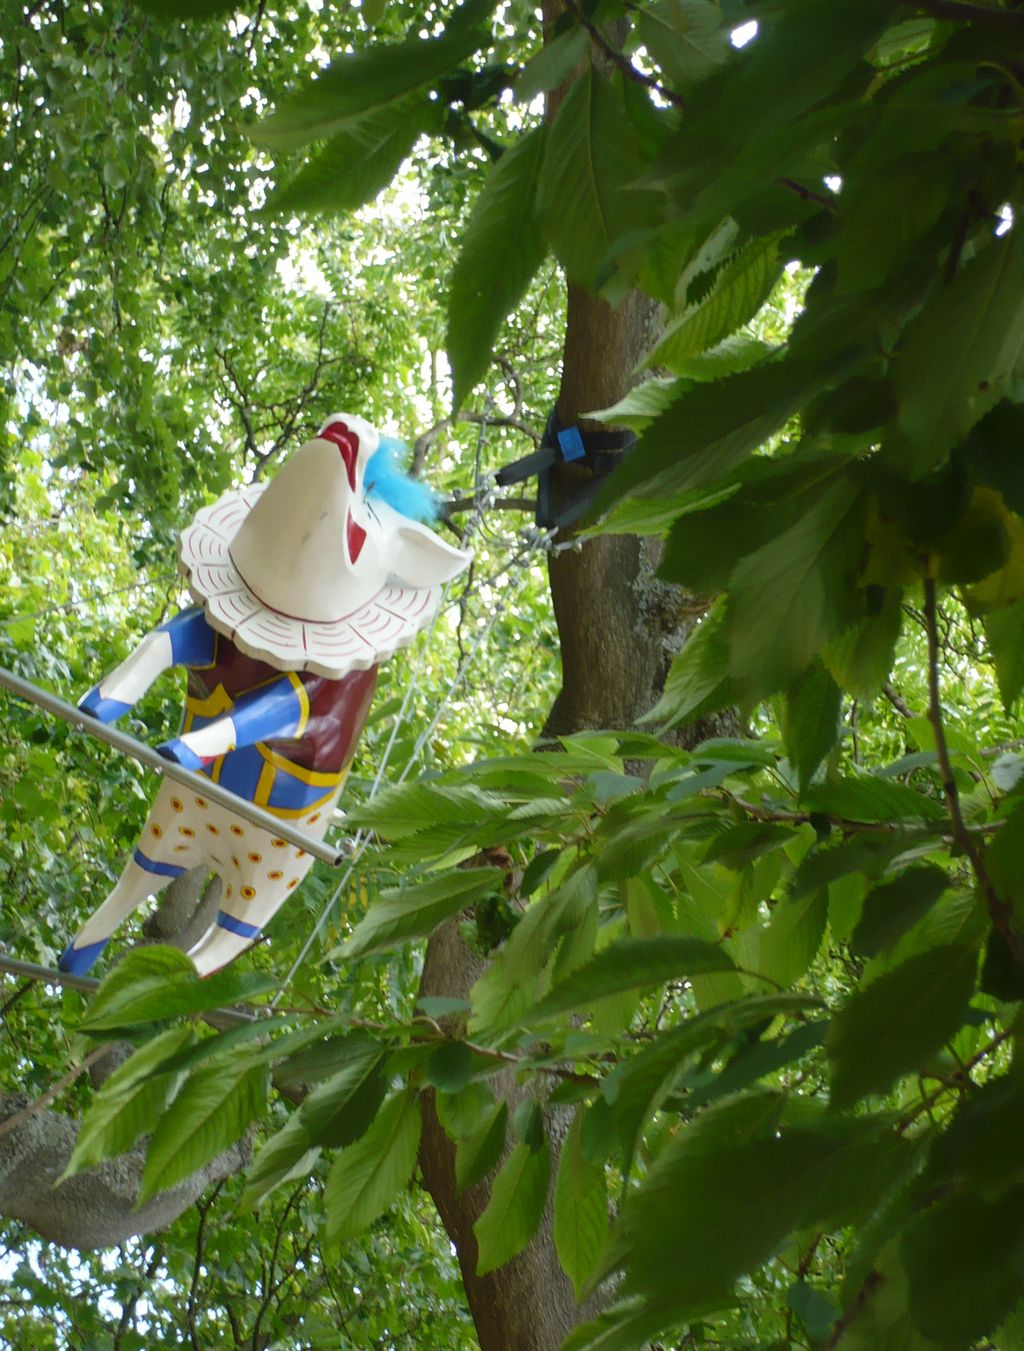 a colorful sculpture is shown in the tree